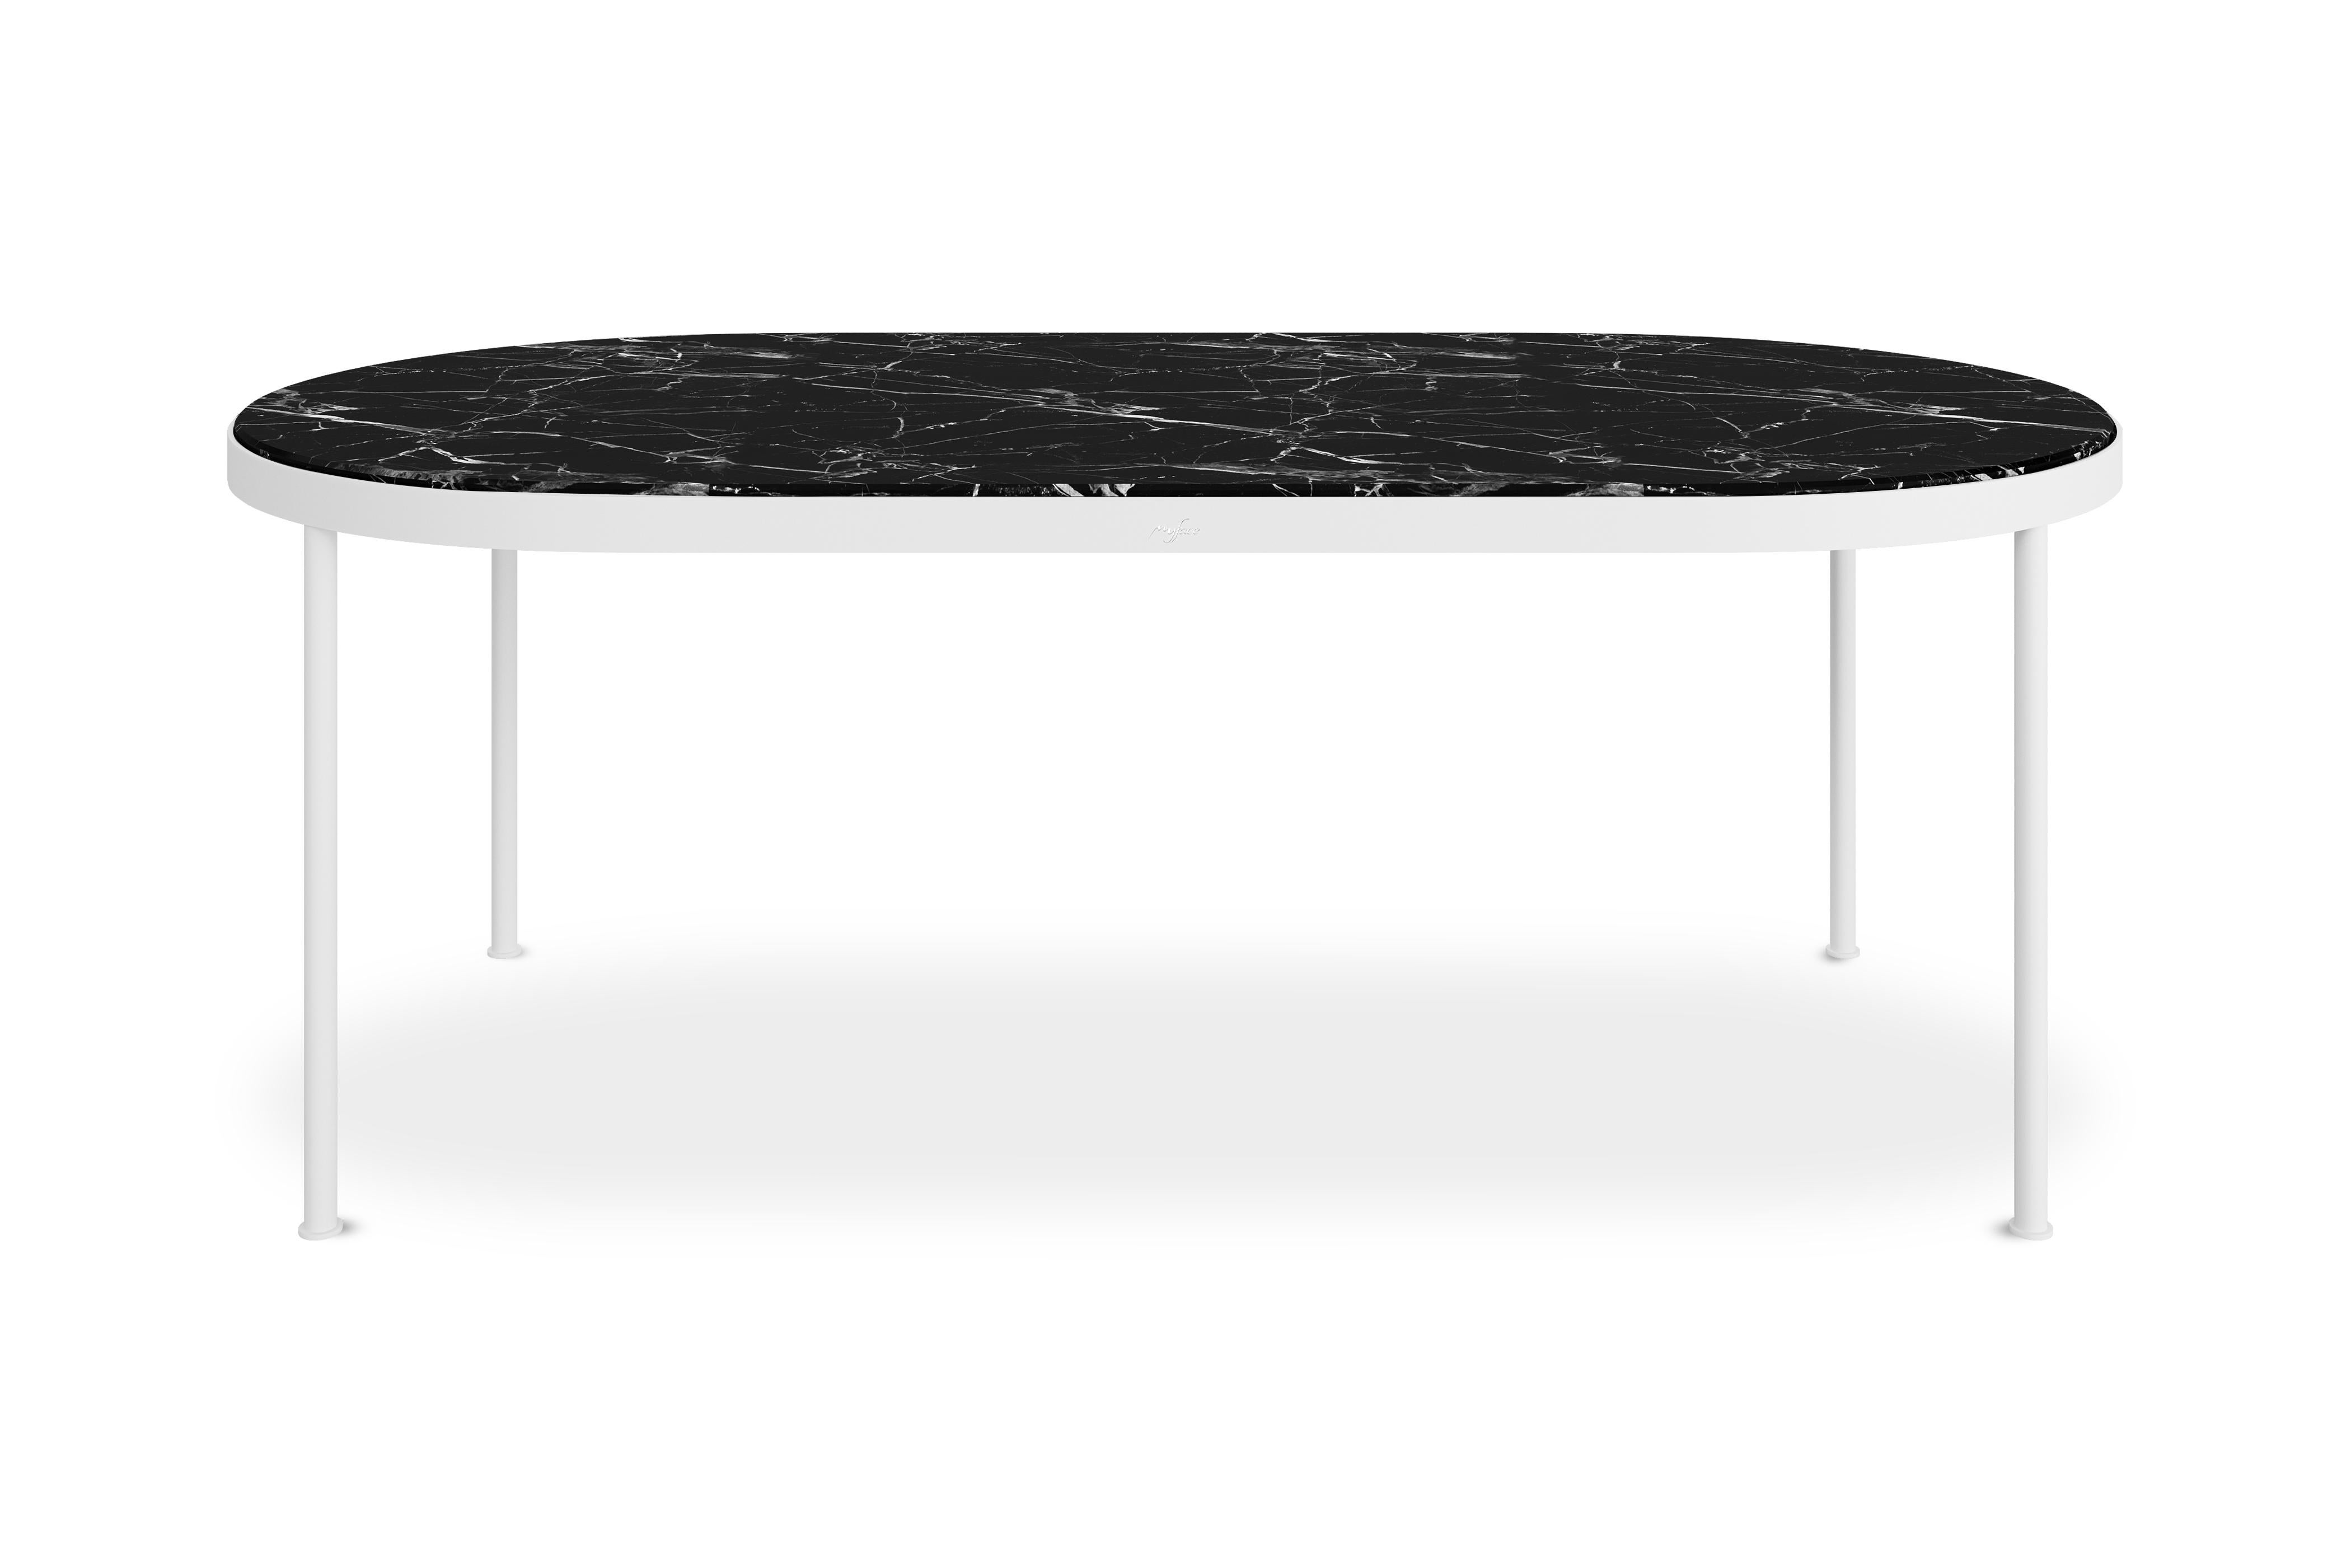 Contemporary Modern Nero Marquina Marble Outdoor Dining Table Big with Lacquered Legs For Sale